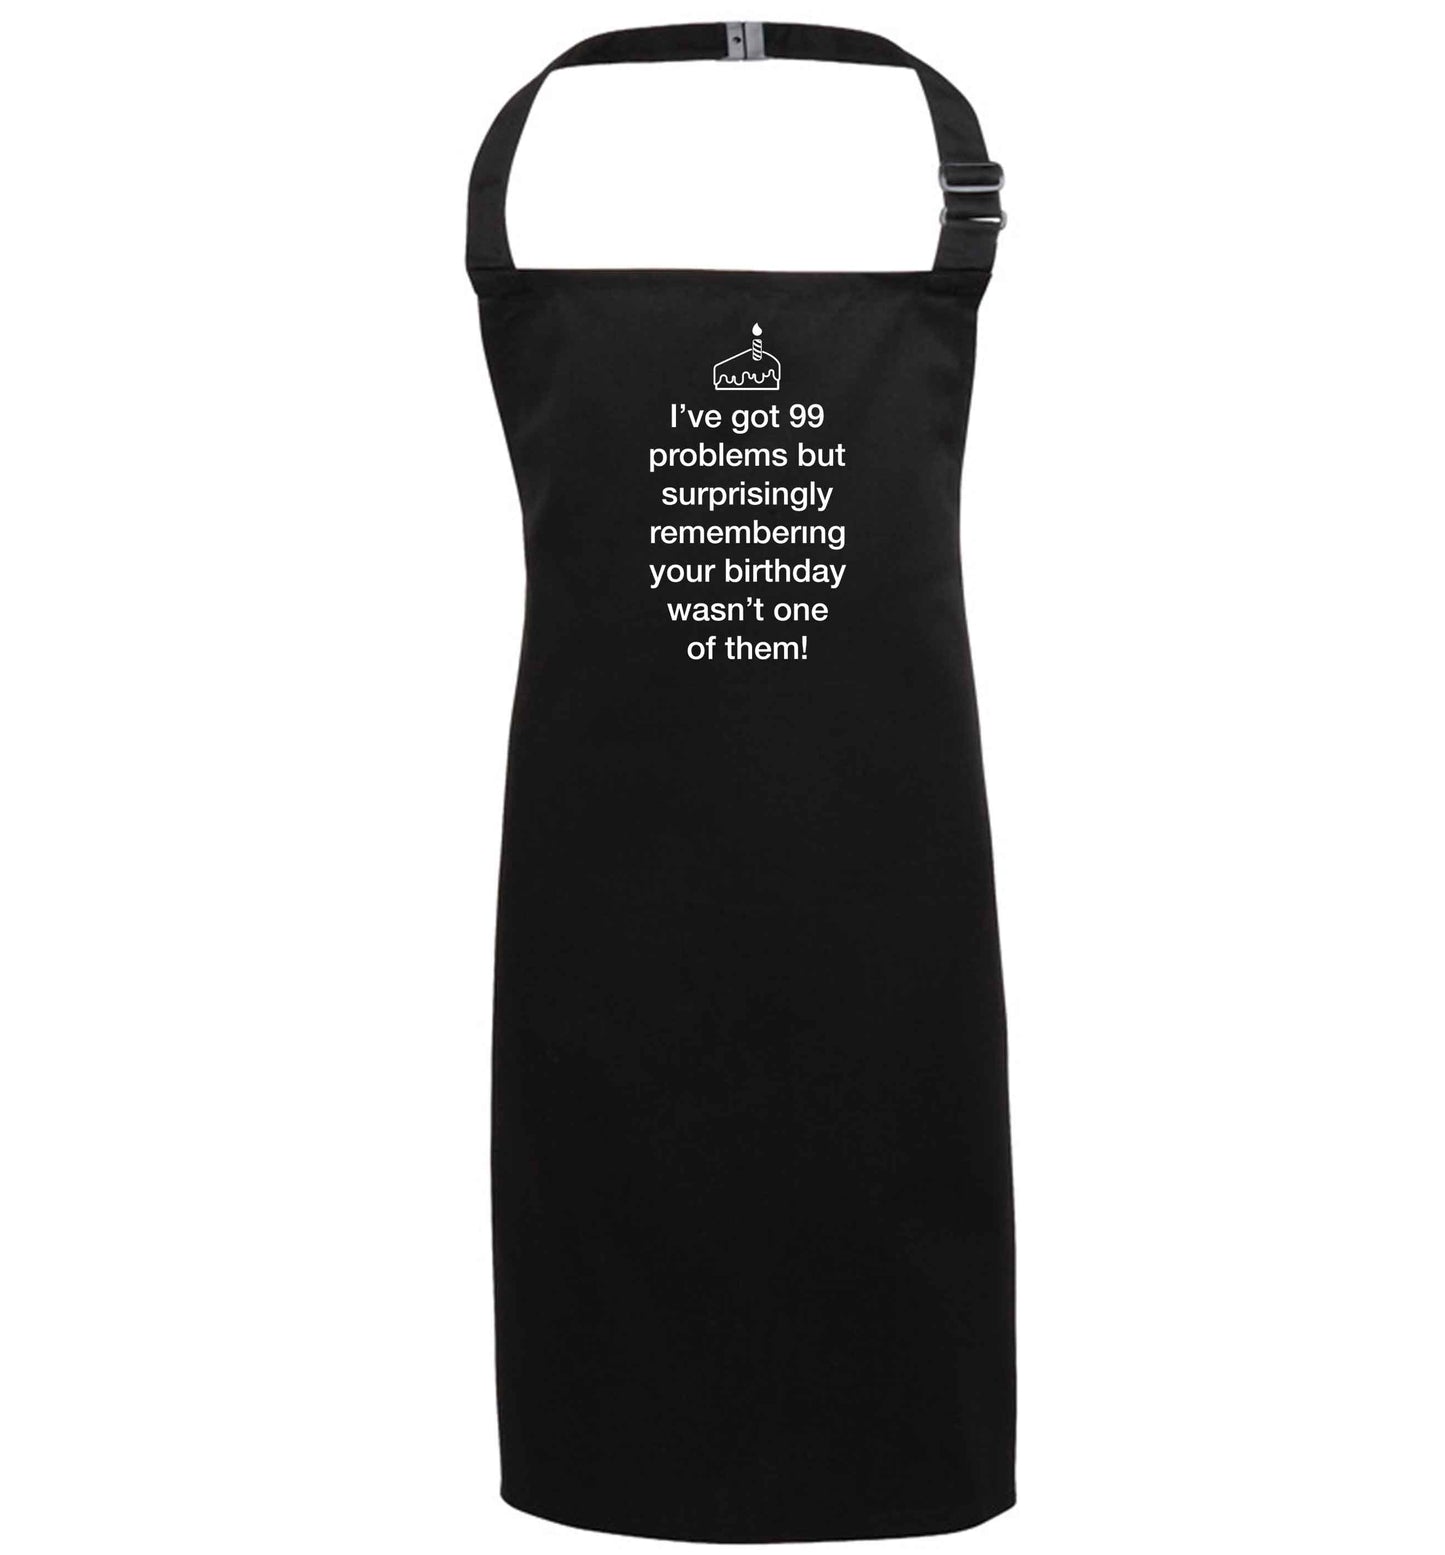 I've got 99 problems but surprisingly remembering your birthday wasn't one of them! black apron 7-10 years